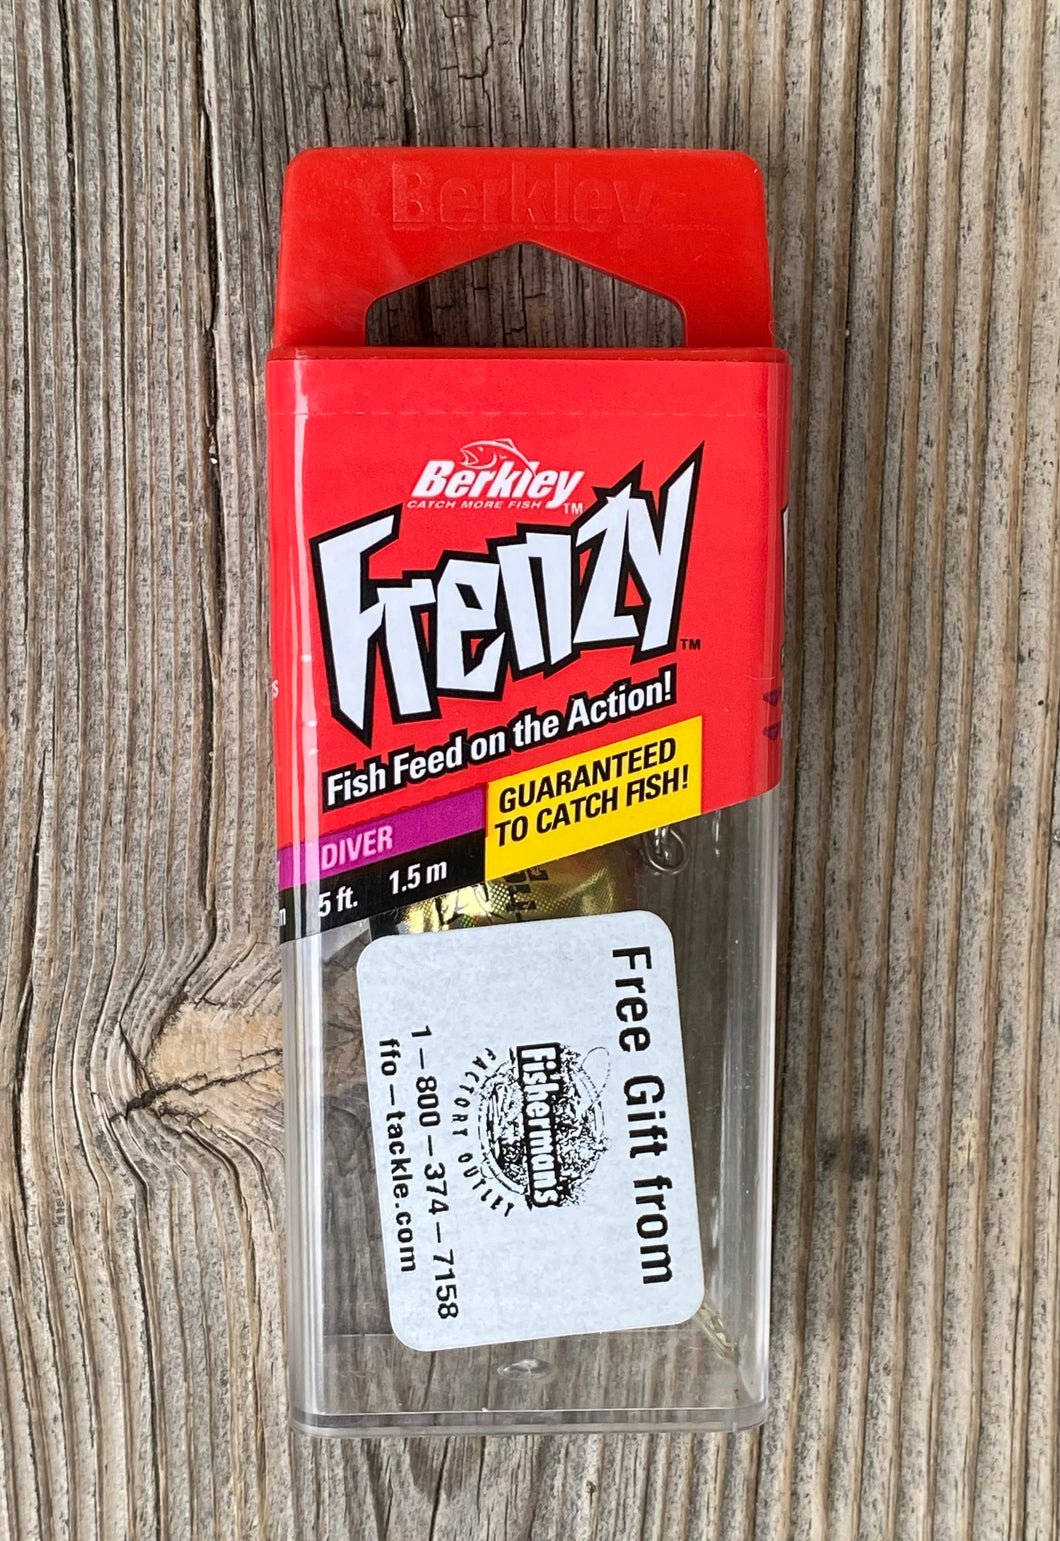 LIMITED EDITION • Berkley FRENZY Fishing Lure • COPPERHEAD PRO REEL • Fisherman's Factory Outlet Advertising Bait